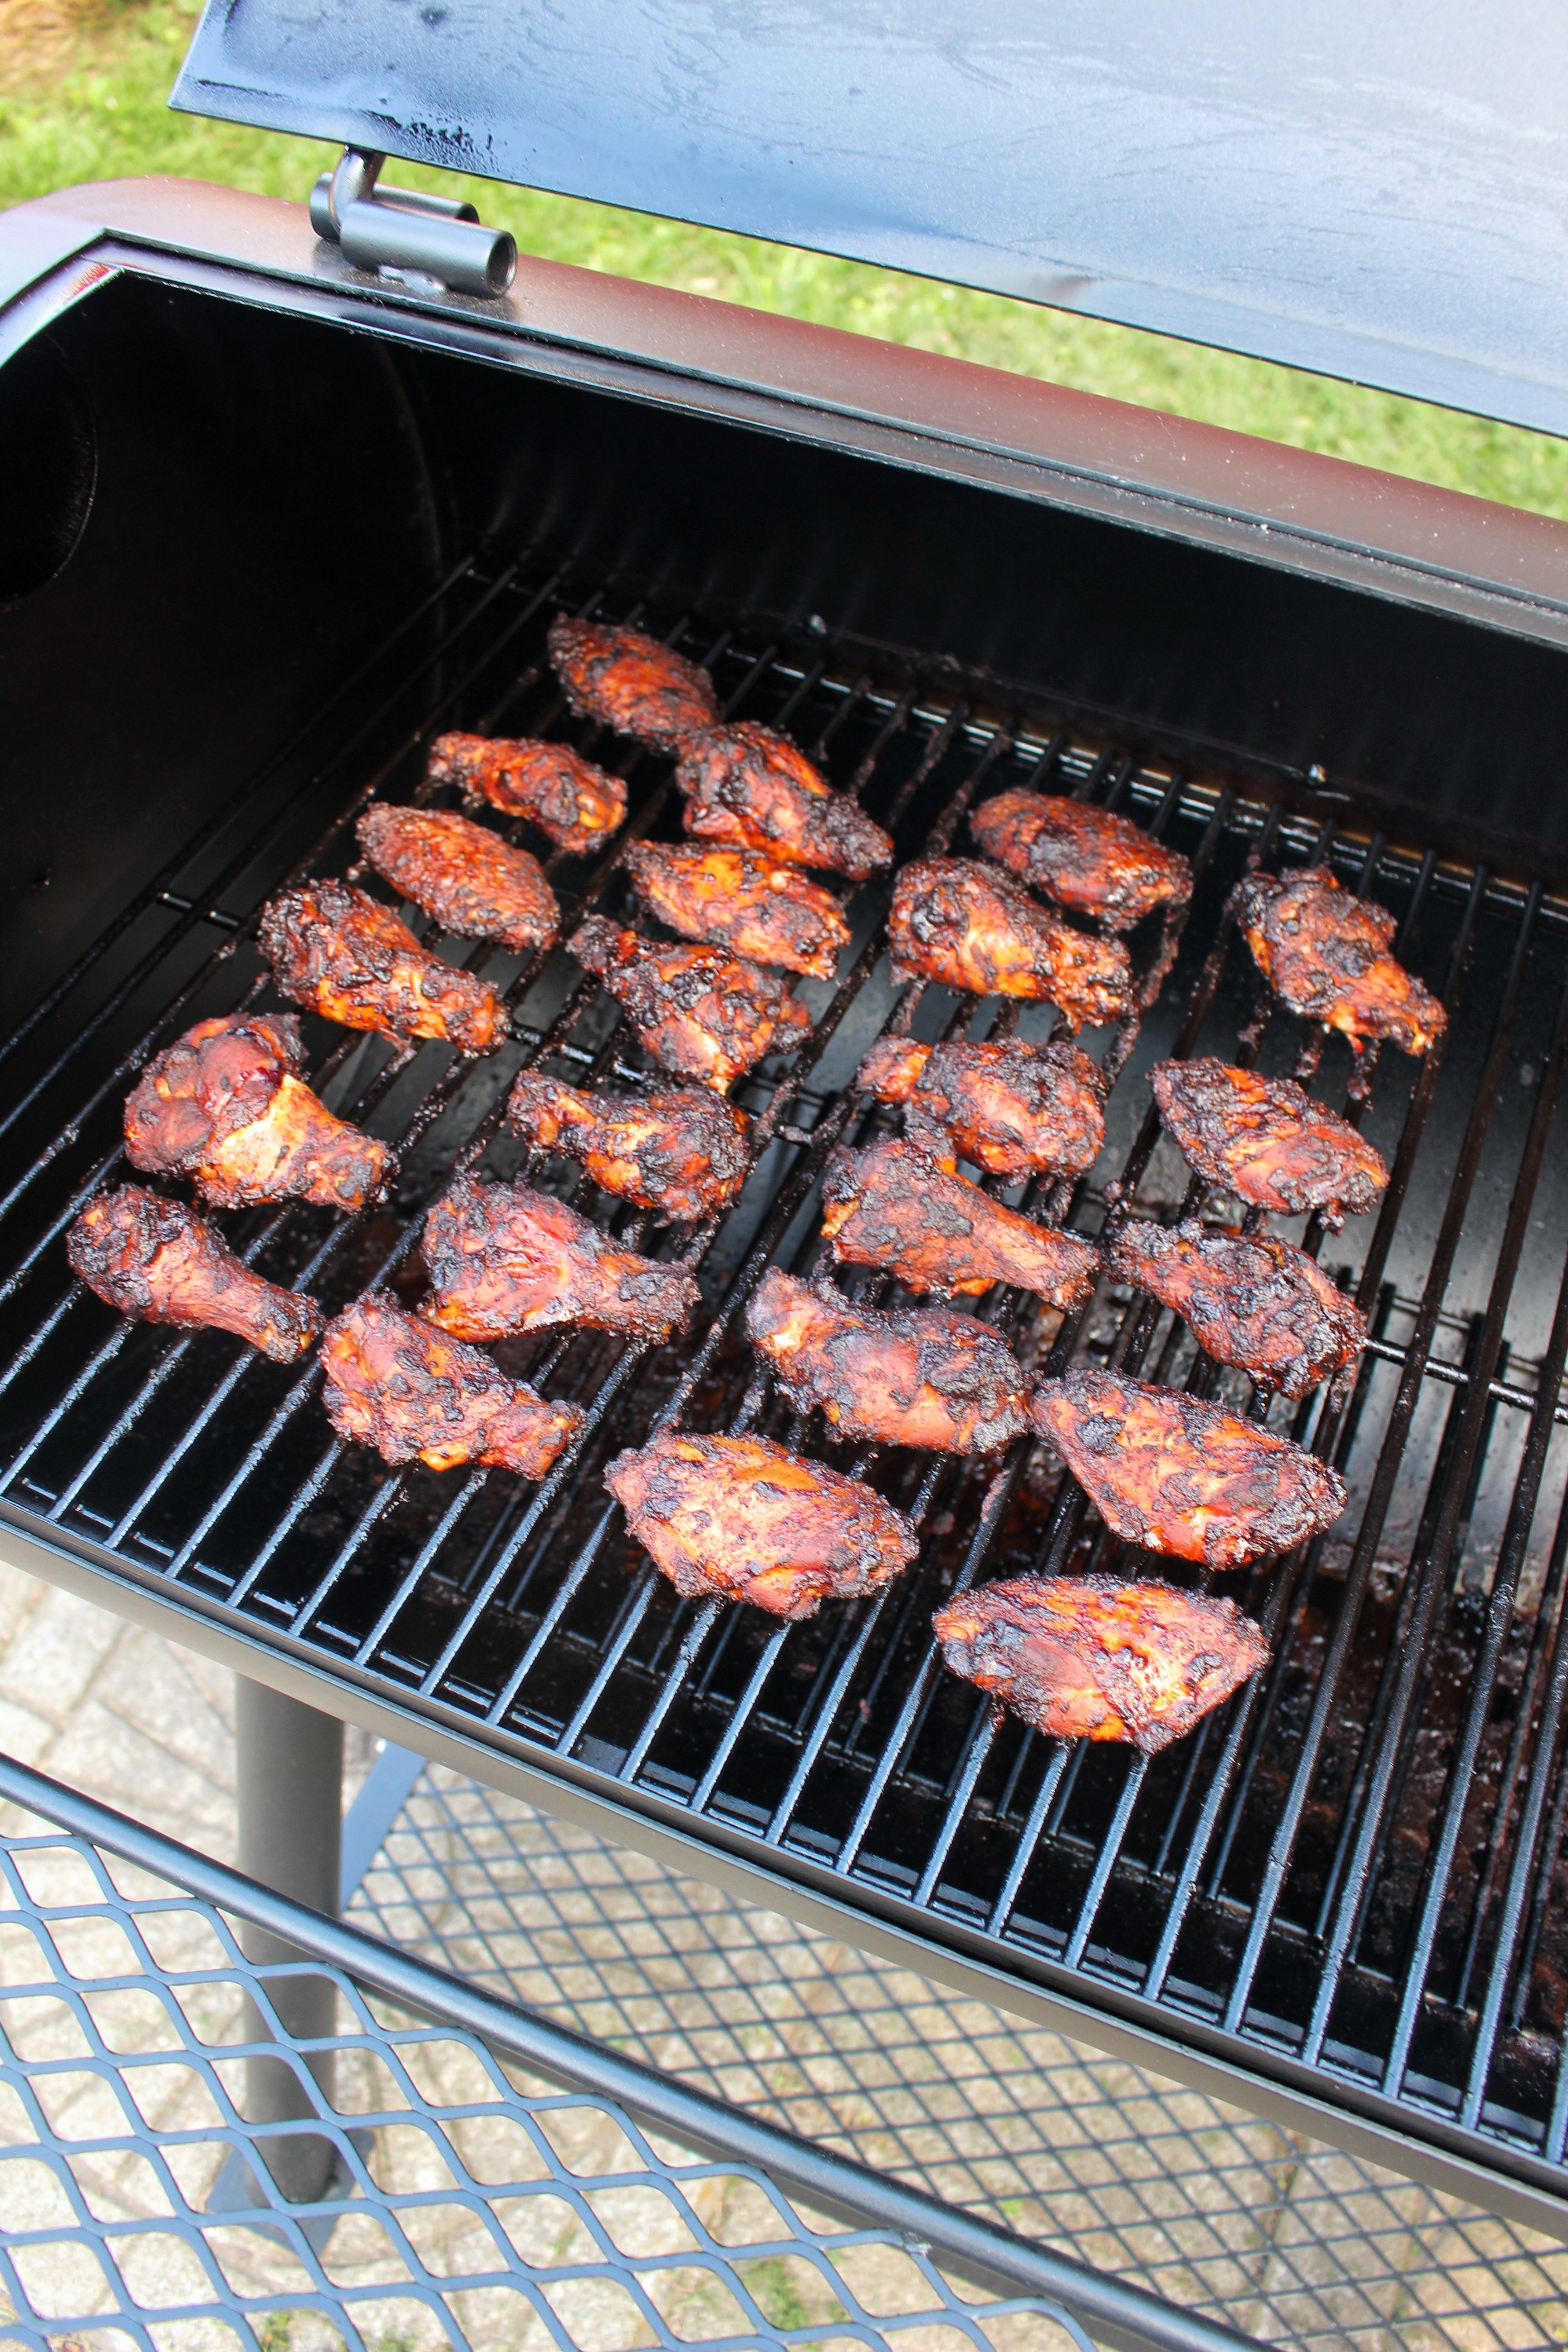 Smoked wings ready to be fried.